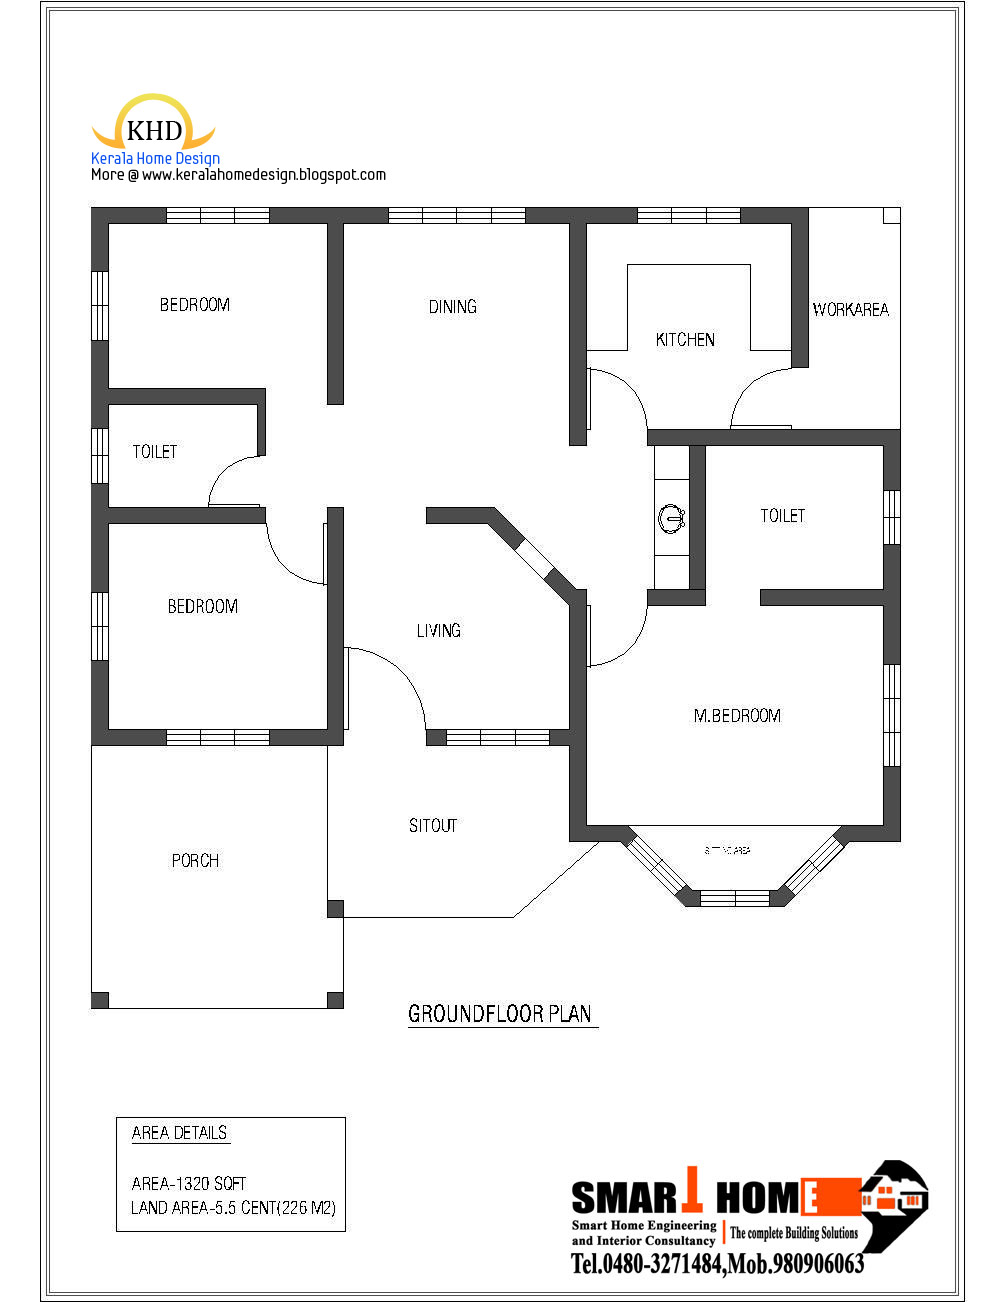  Single  Floor  House  Plan  and Elevation 1320 Sq Ft 